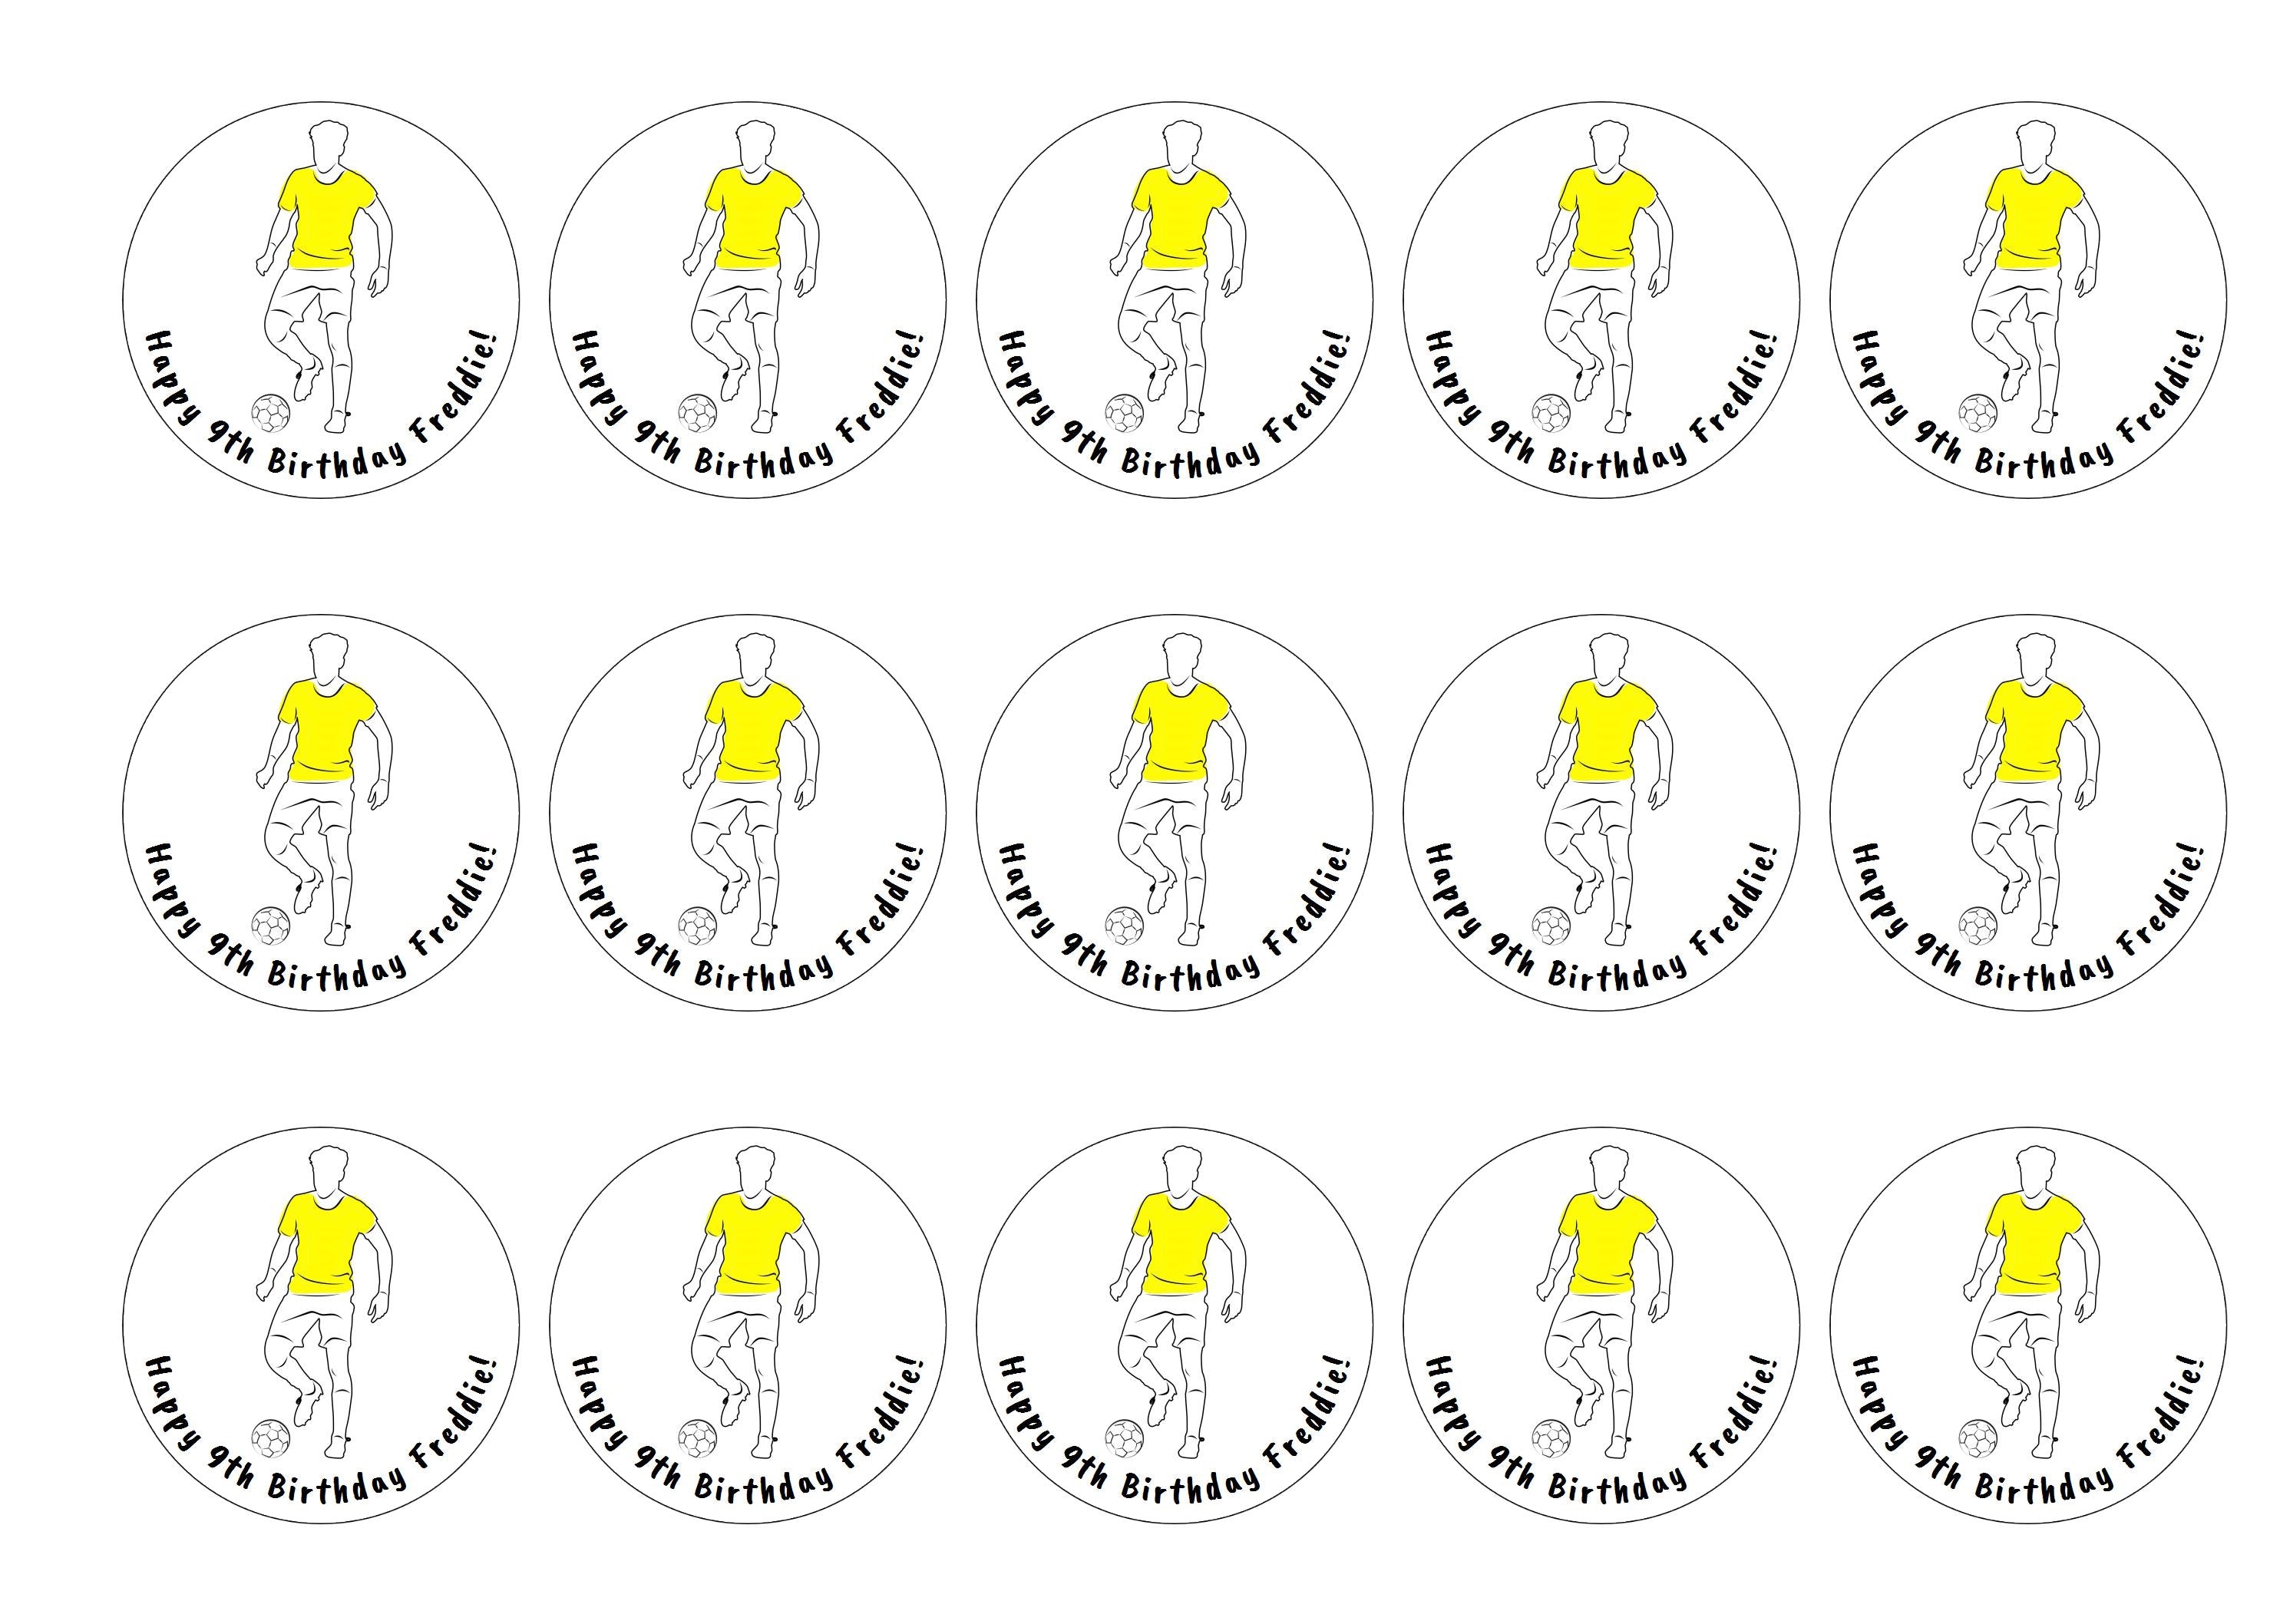 Personalised birthday message cupcake toppers with a yellow football player design